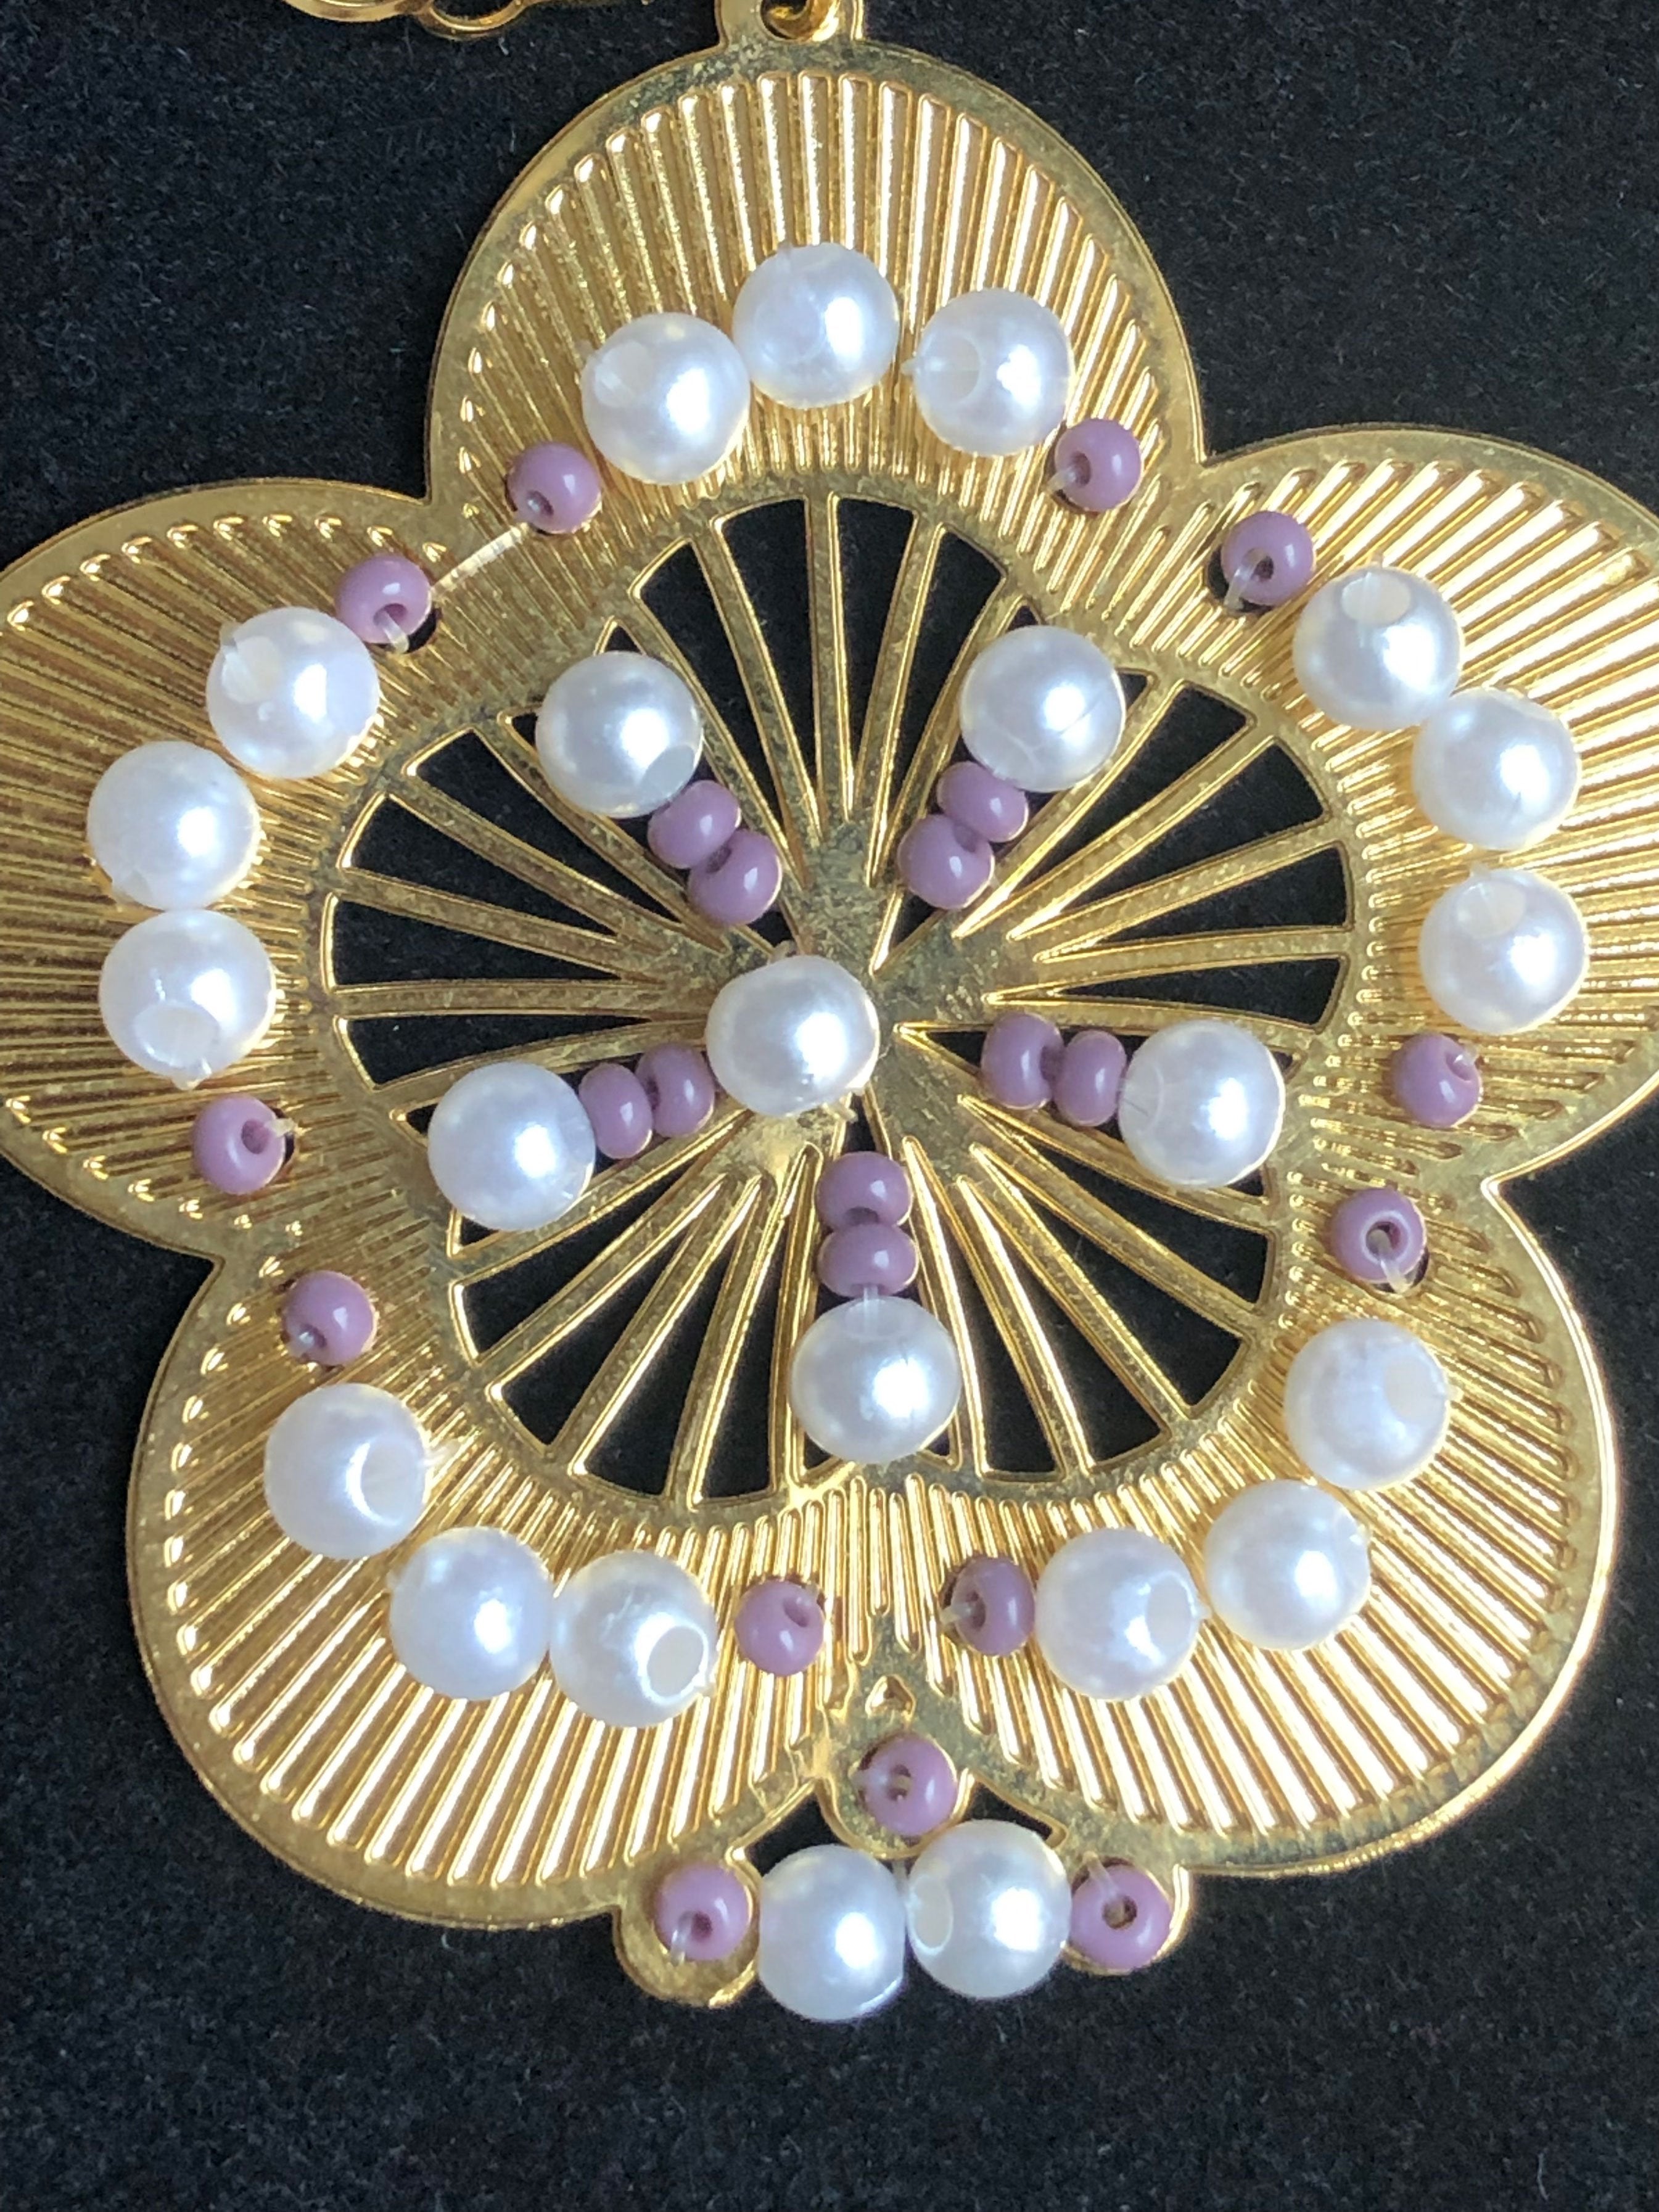 Gold filled earring with acrylic pearls and white beads knitted by hand